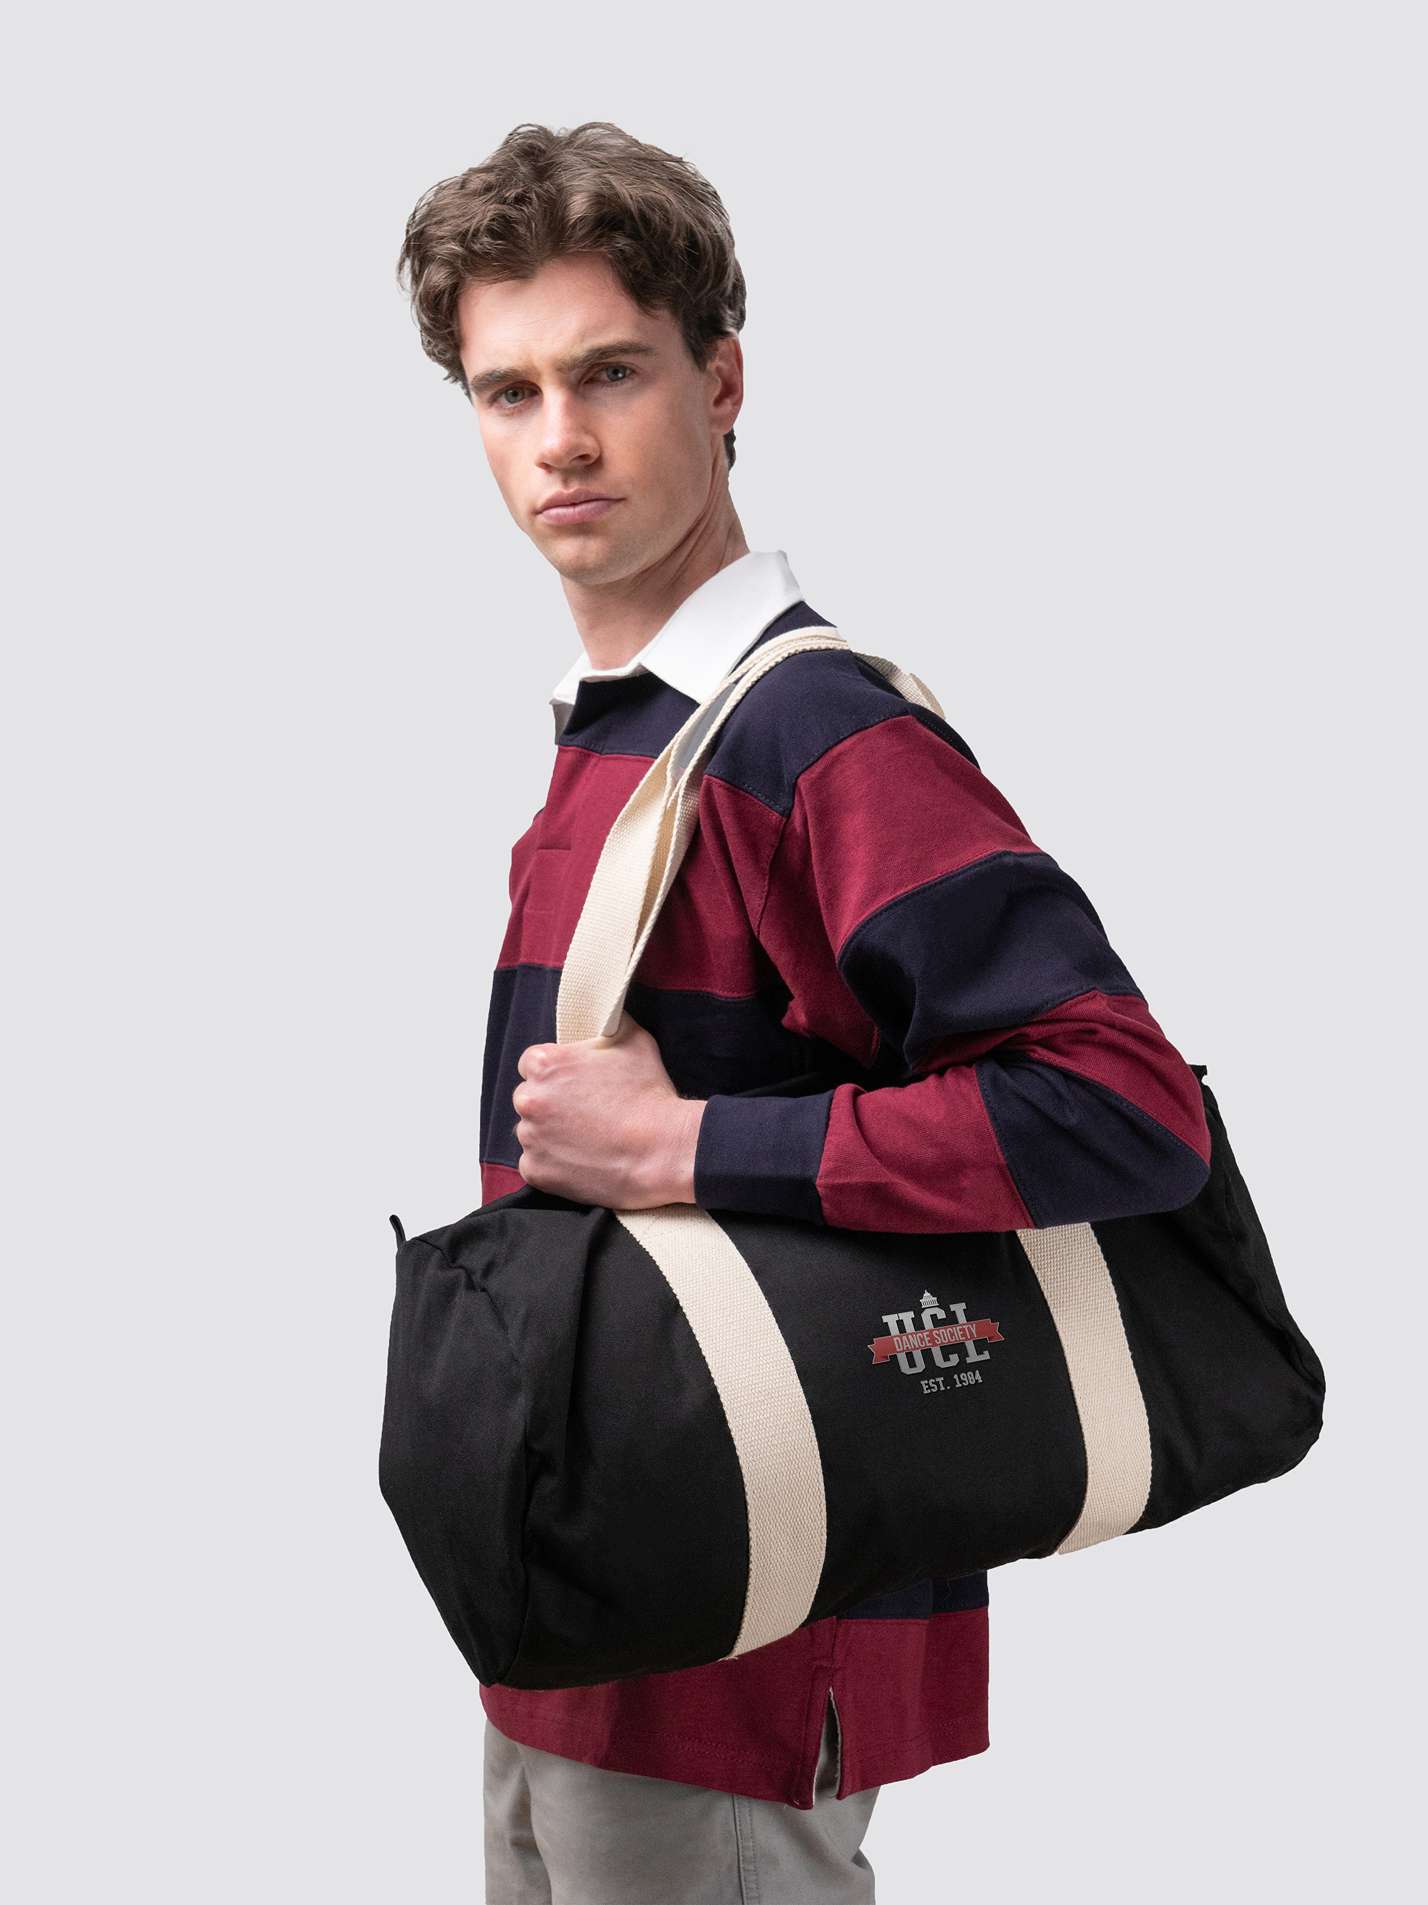 UCL Dance Society Competition Team Organic Cotton Canvas Barrel Bag